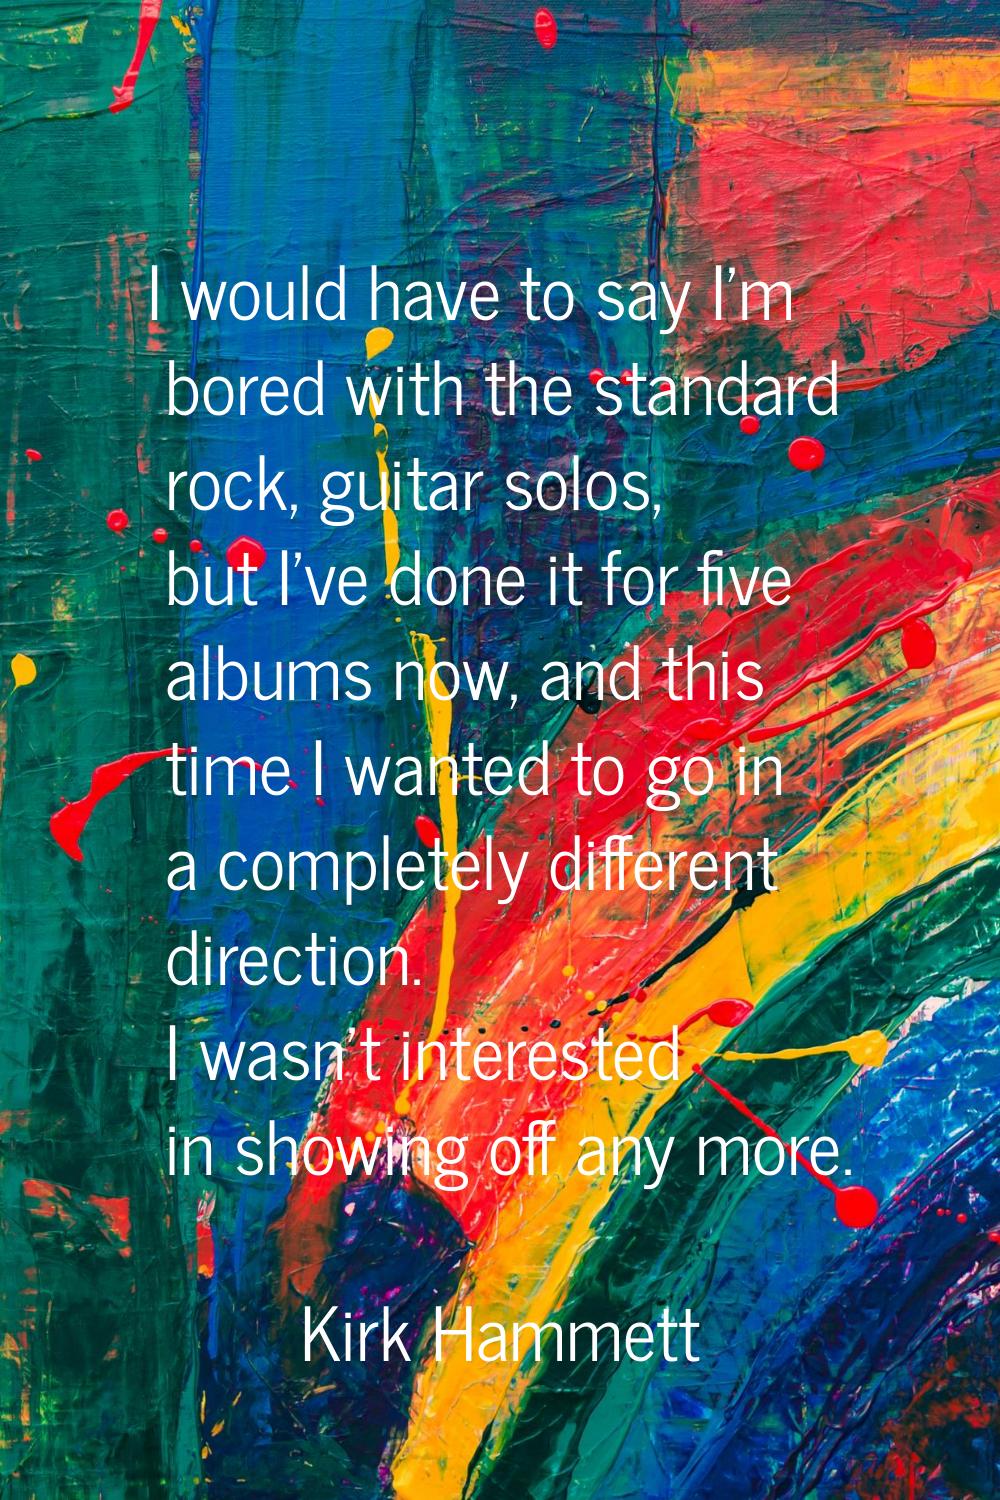 I would have to say I'm bored with the standard rock, guitar solos, but I've done it for five album